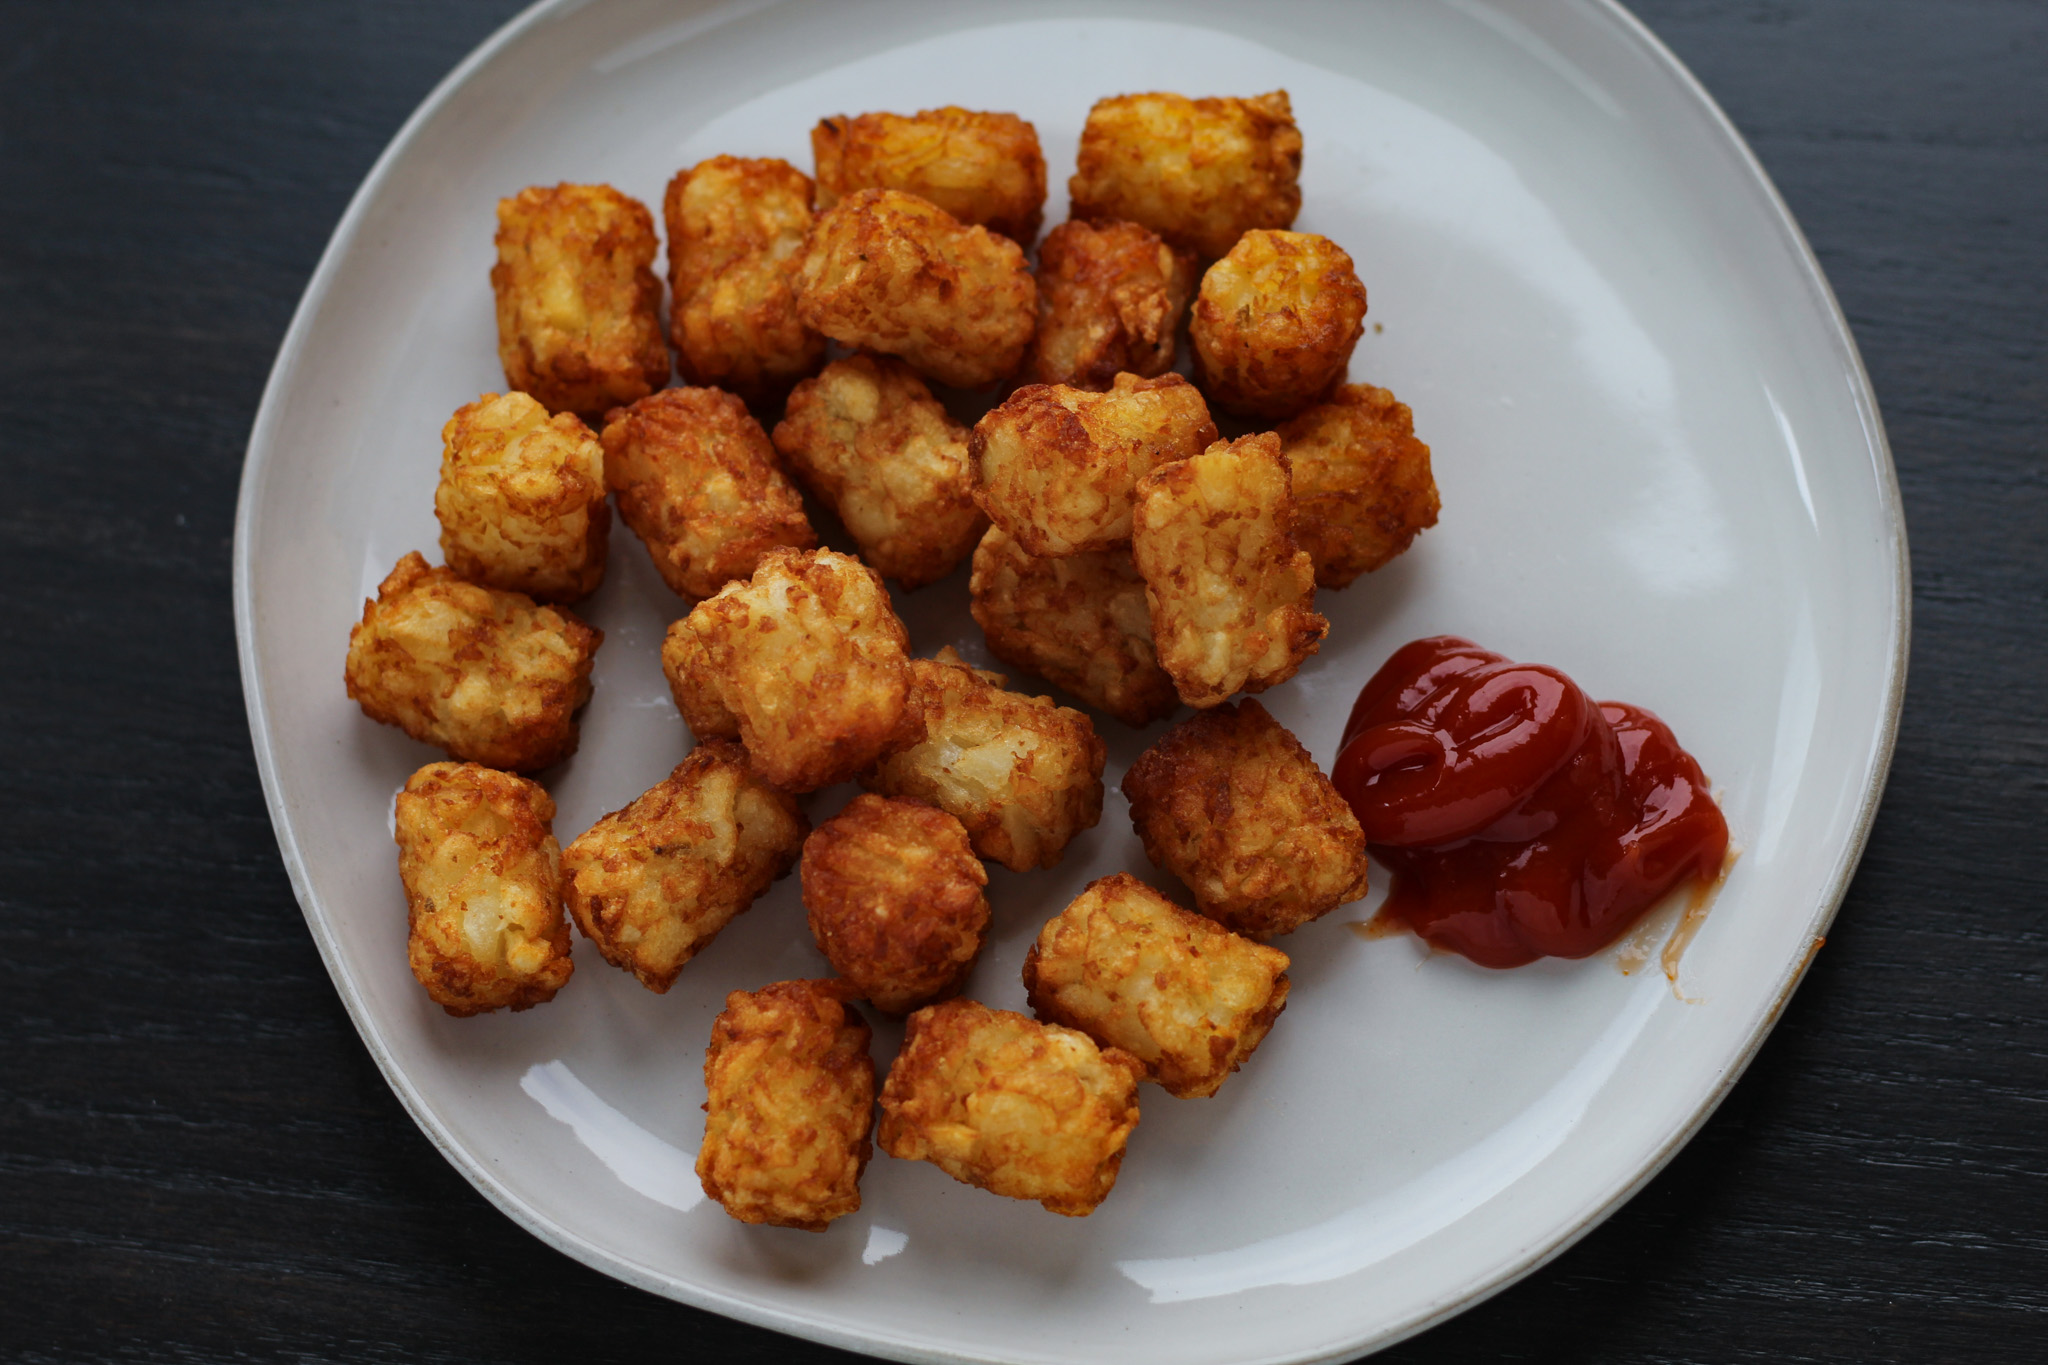 Tater tots on plate with ketchup